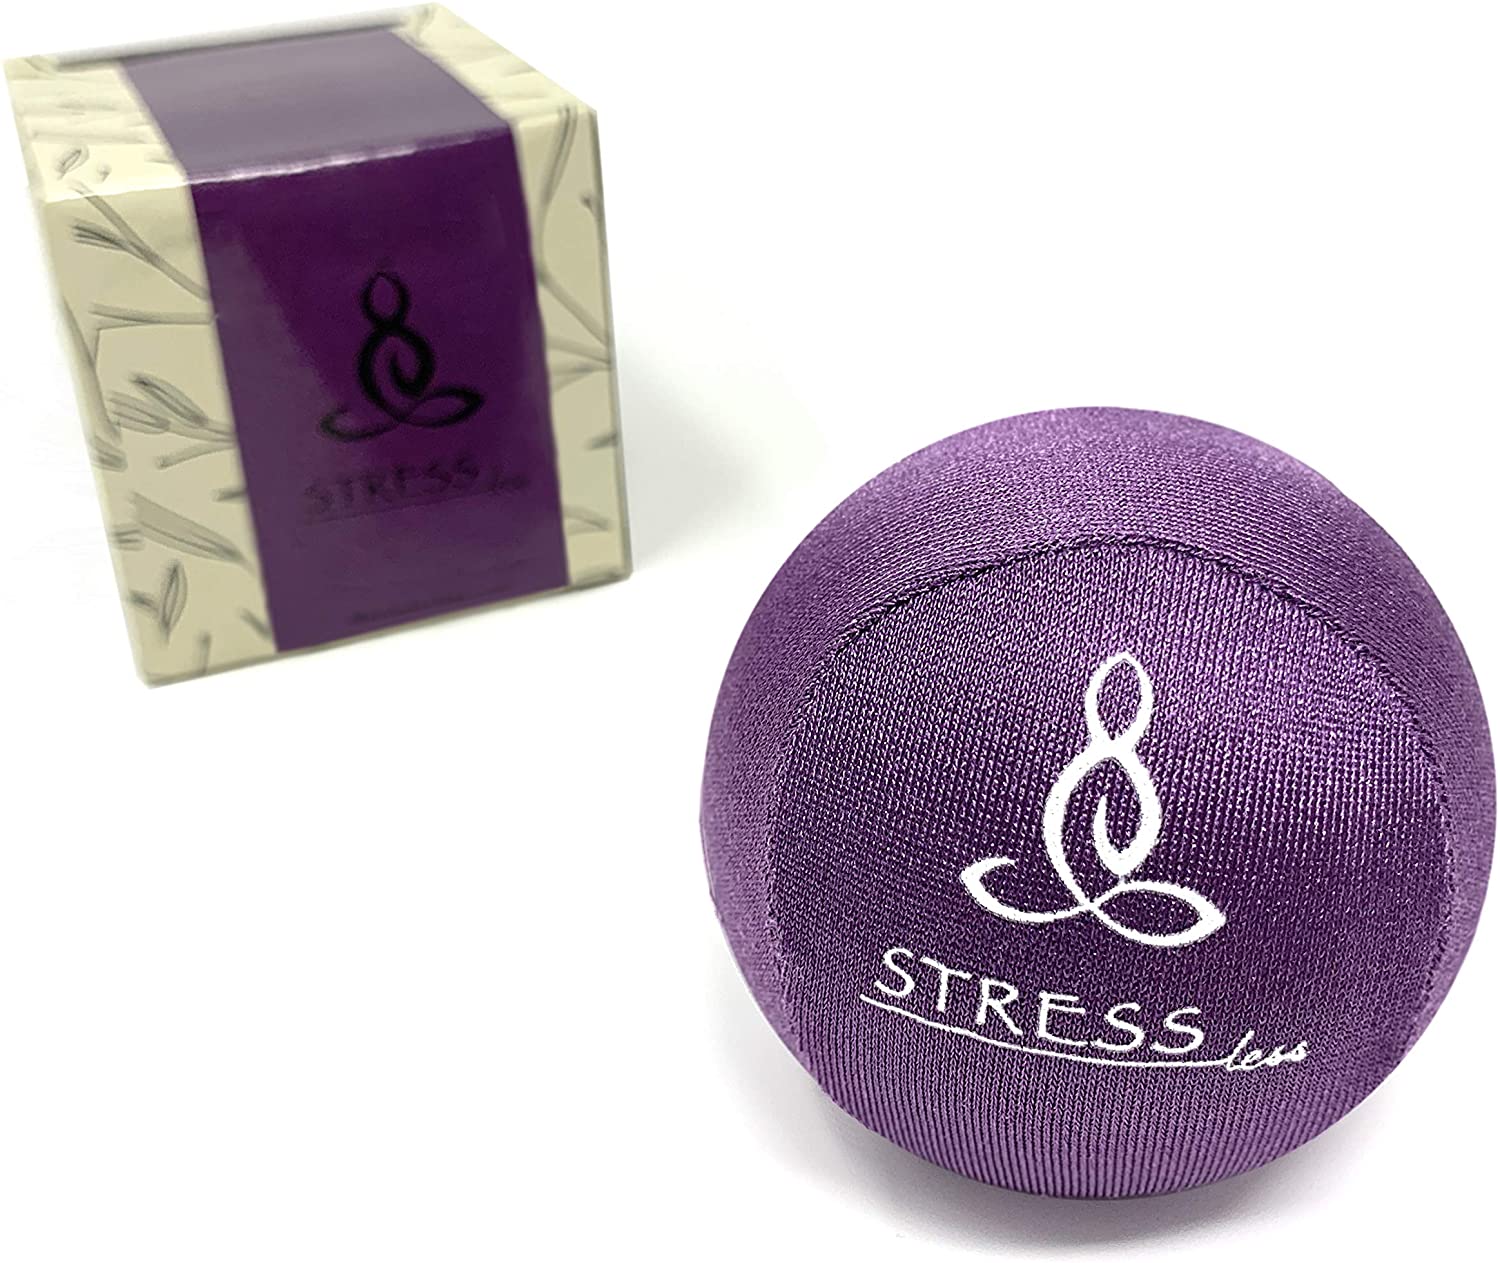 Hand Therapy Stress Ball - Perfect for Anxiety